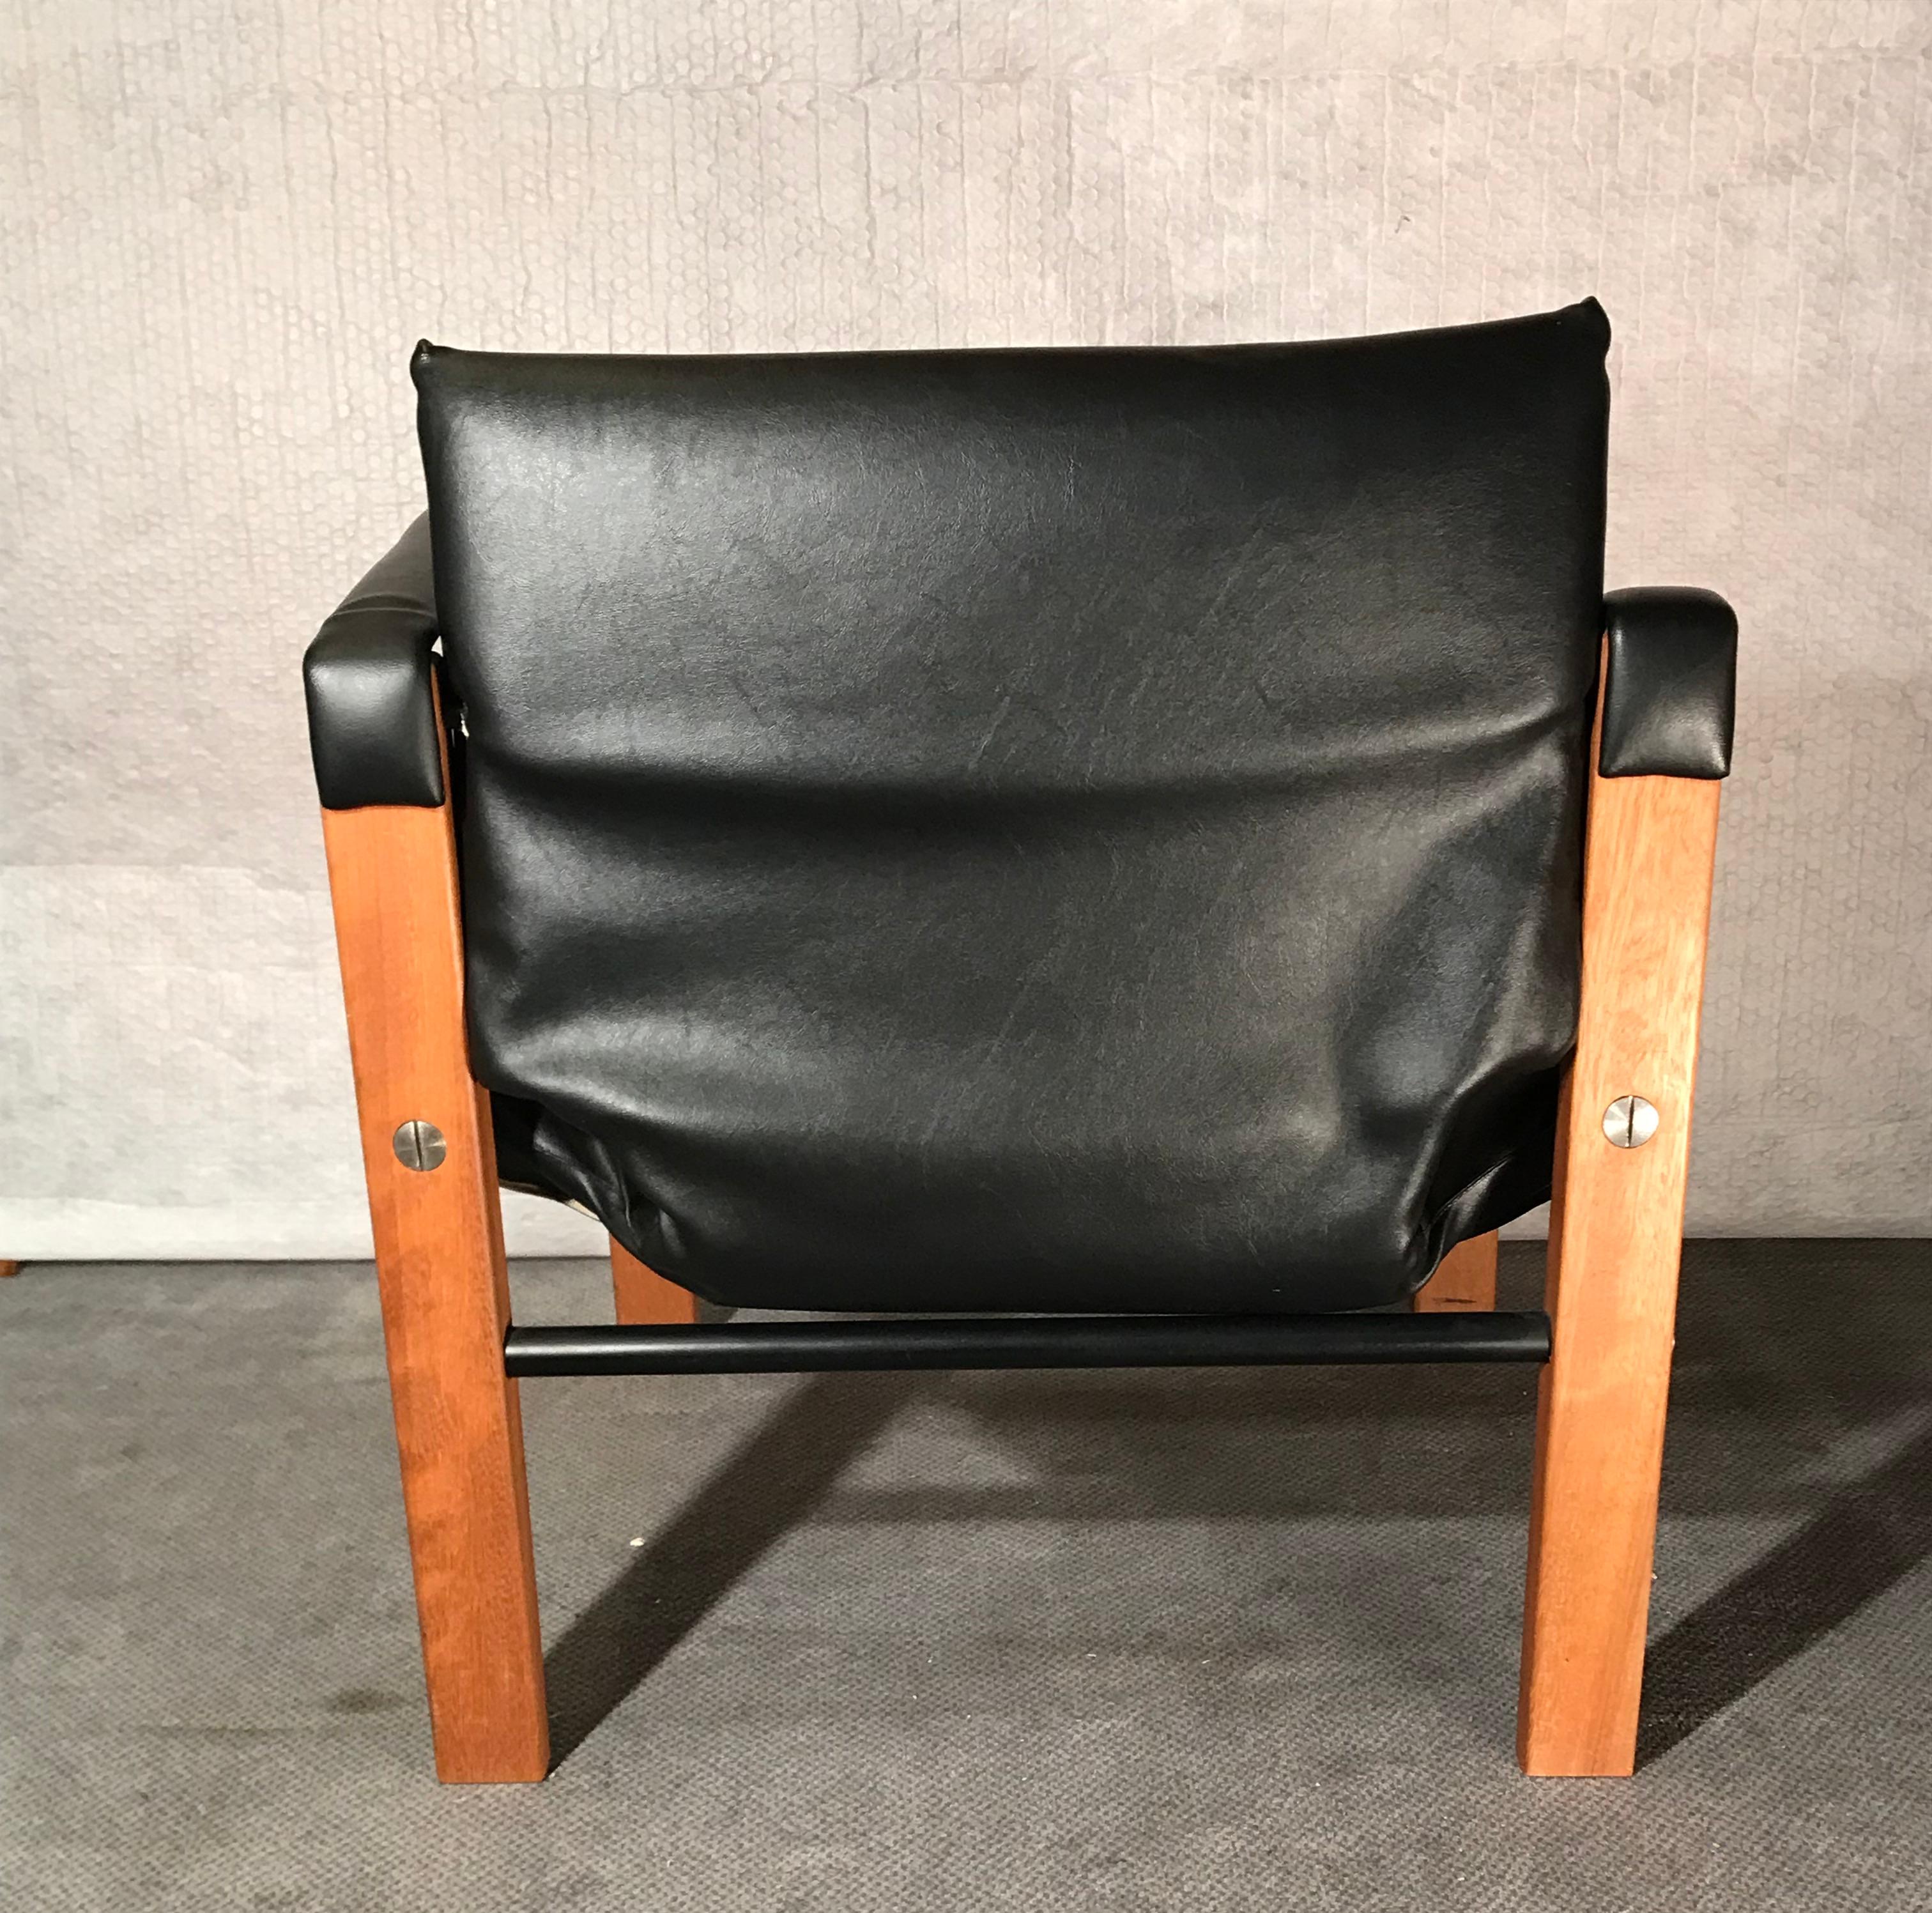 Stunning pair of safari chairs designed by Maurice Burke in Bath England, 1970s. 
These black safari chairs are upholstered in a black marine grade vegan leather and are accented with stainless steel rivets on a gorgeous teak frame. These safari